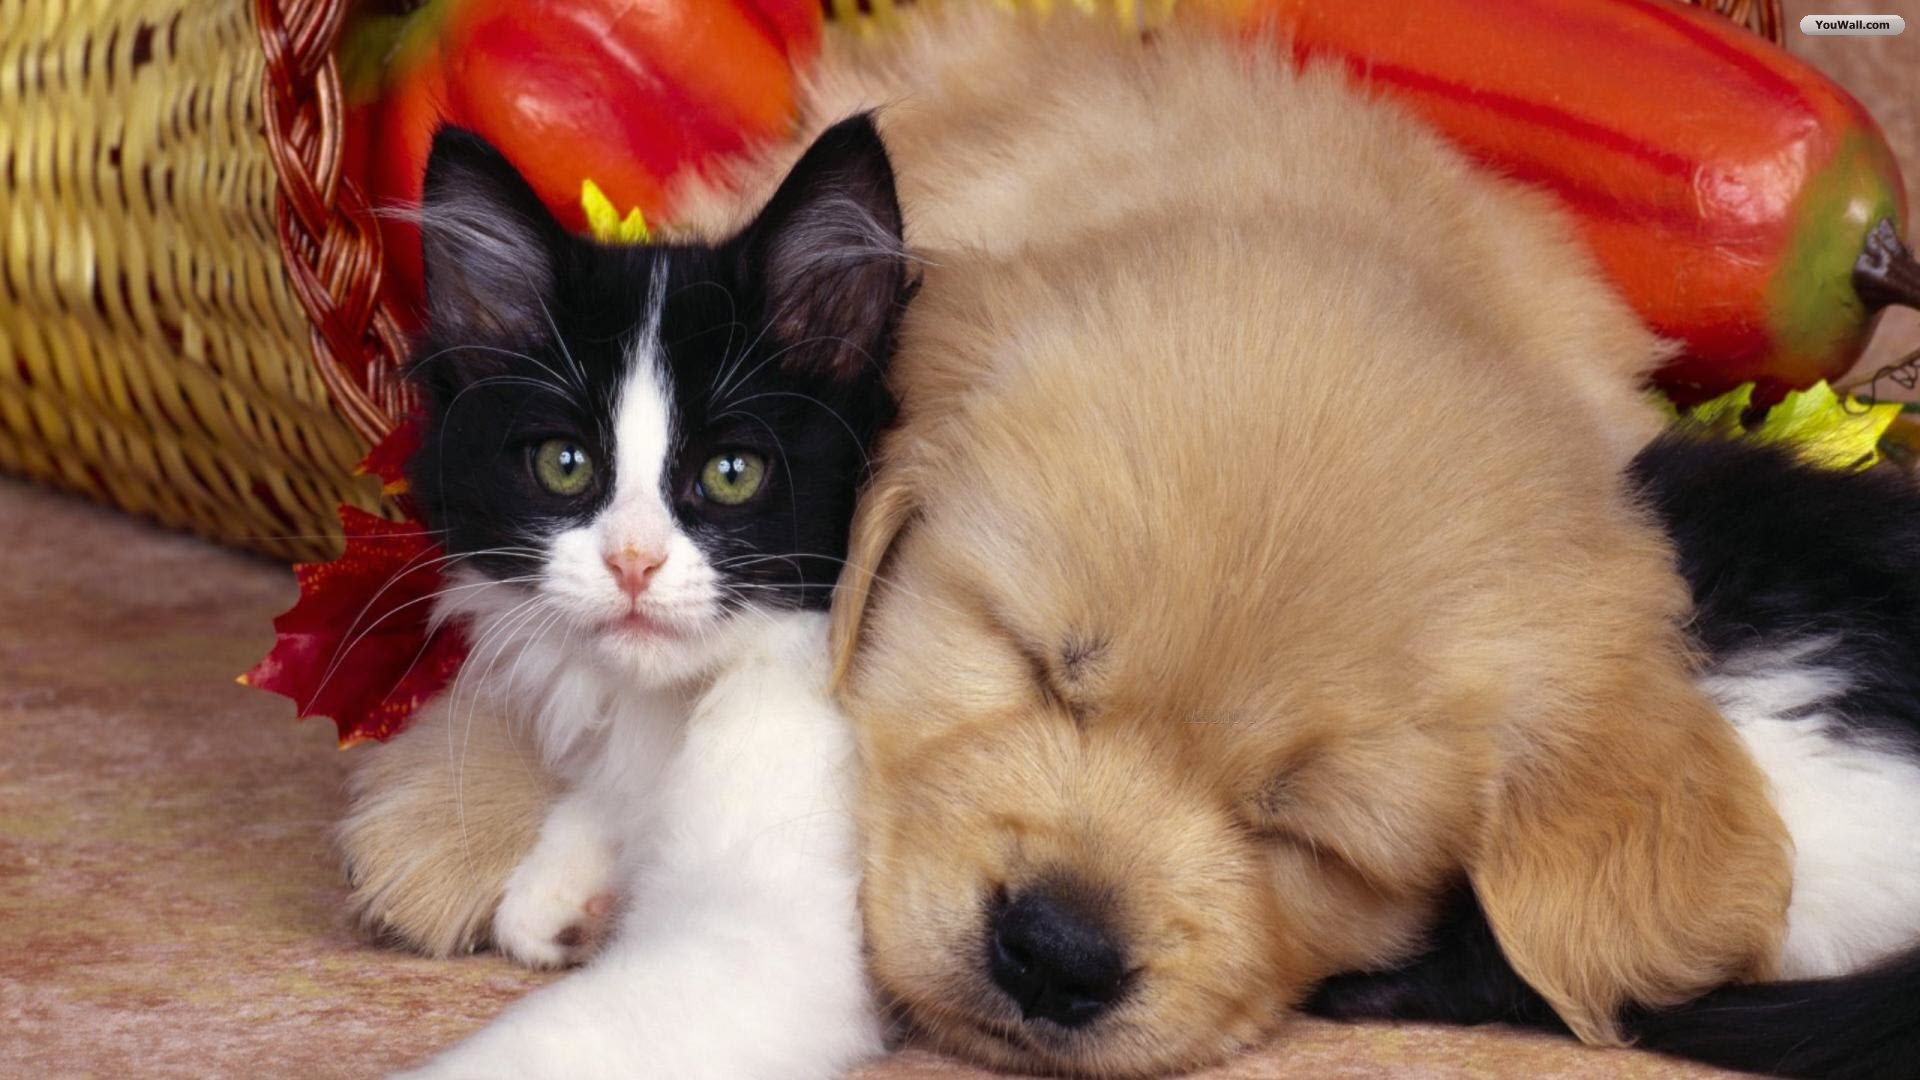 Small Cute Cat And Dog - HD Wallpaper 